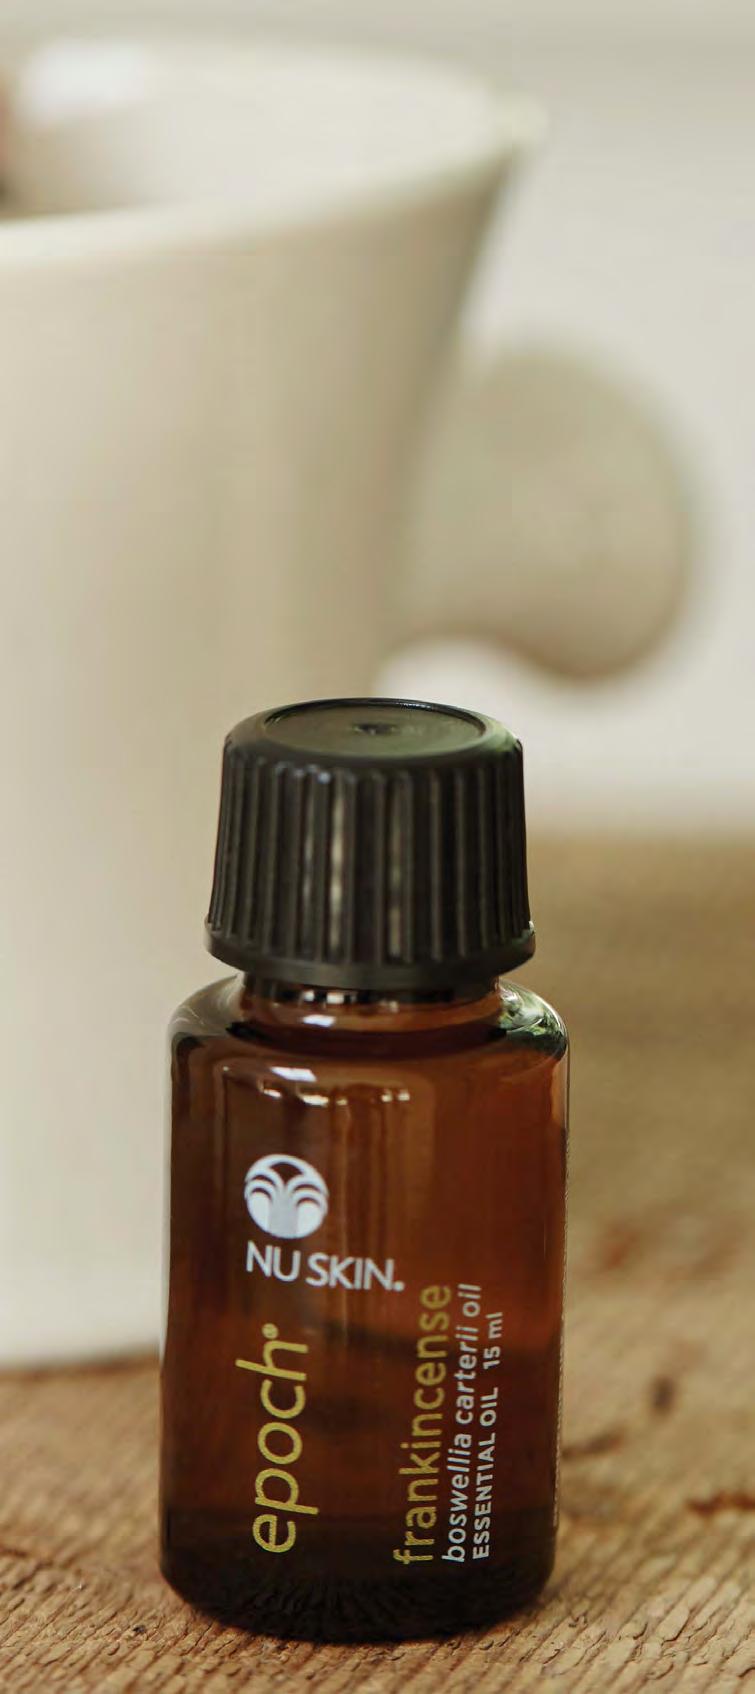 SINGLE OILS EPOCH PEPPERMINT MENTHA PIPERITA Dive into the refreshing, sharp aroma of Epoch Peppermint essential oil at home or on the go.